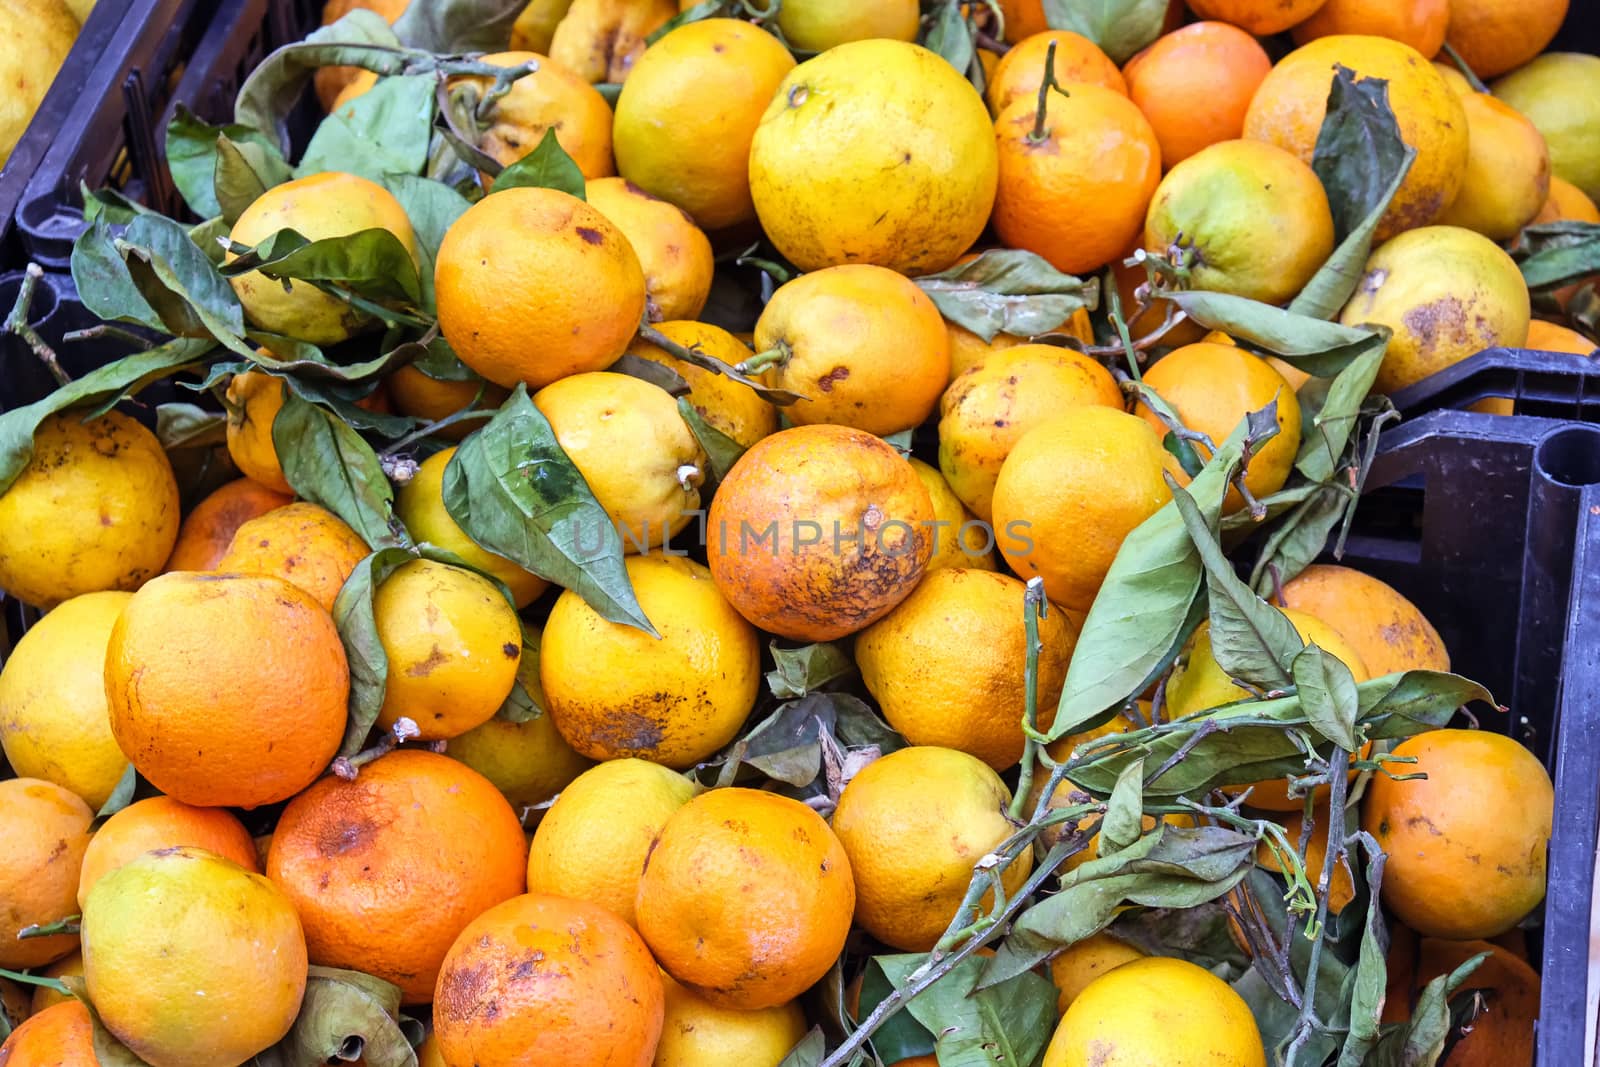 Oranges with leaves for sale at a market